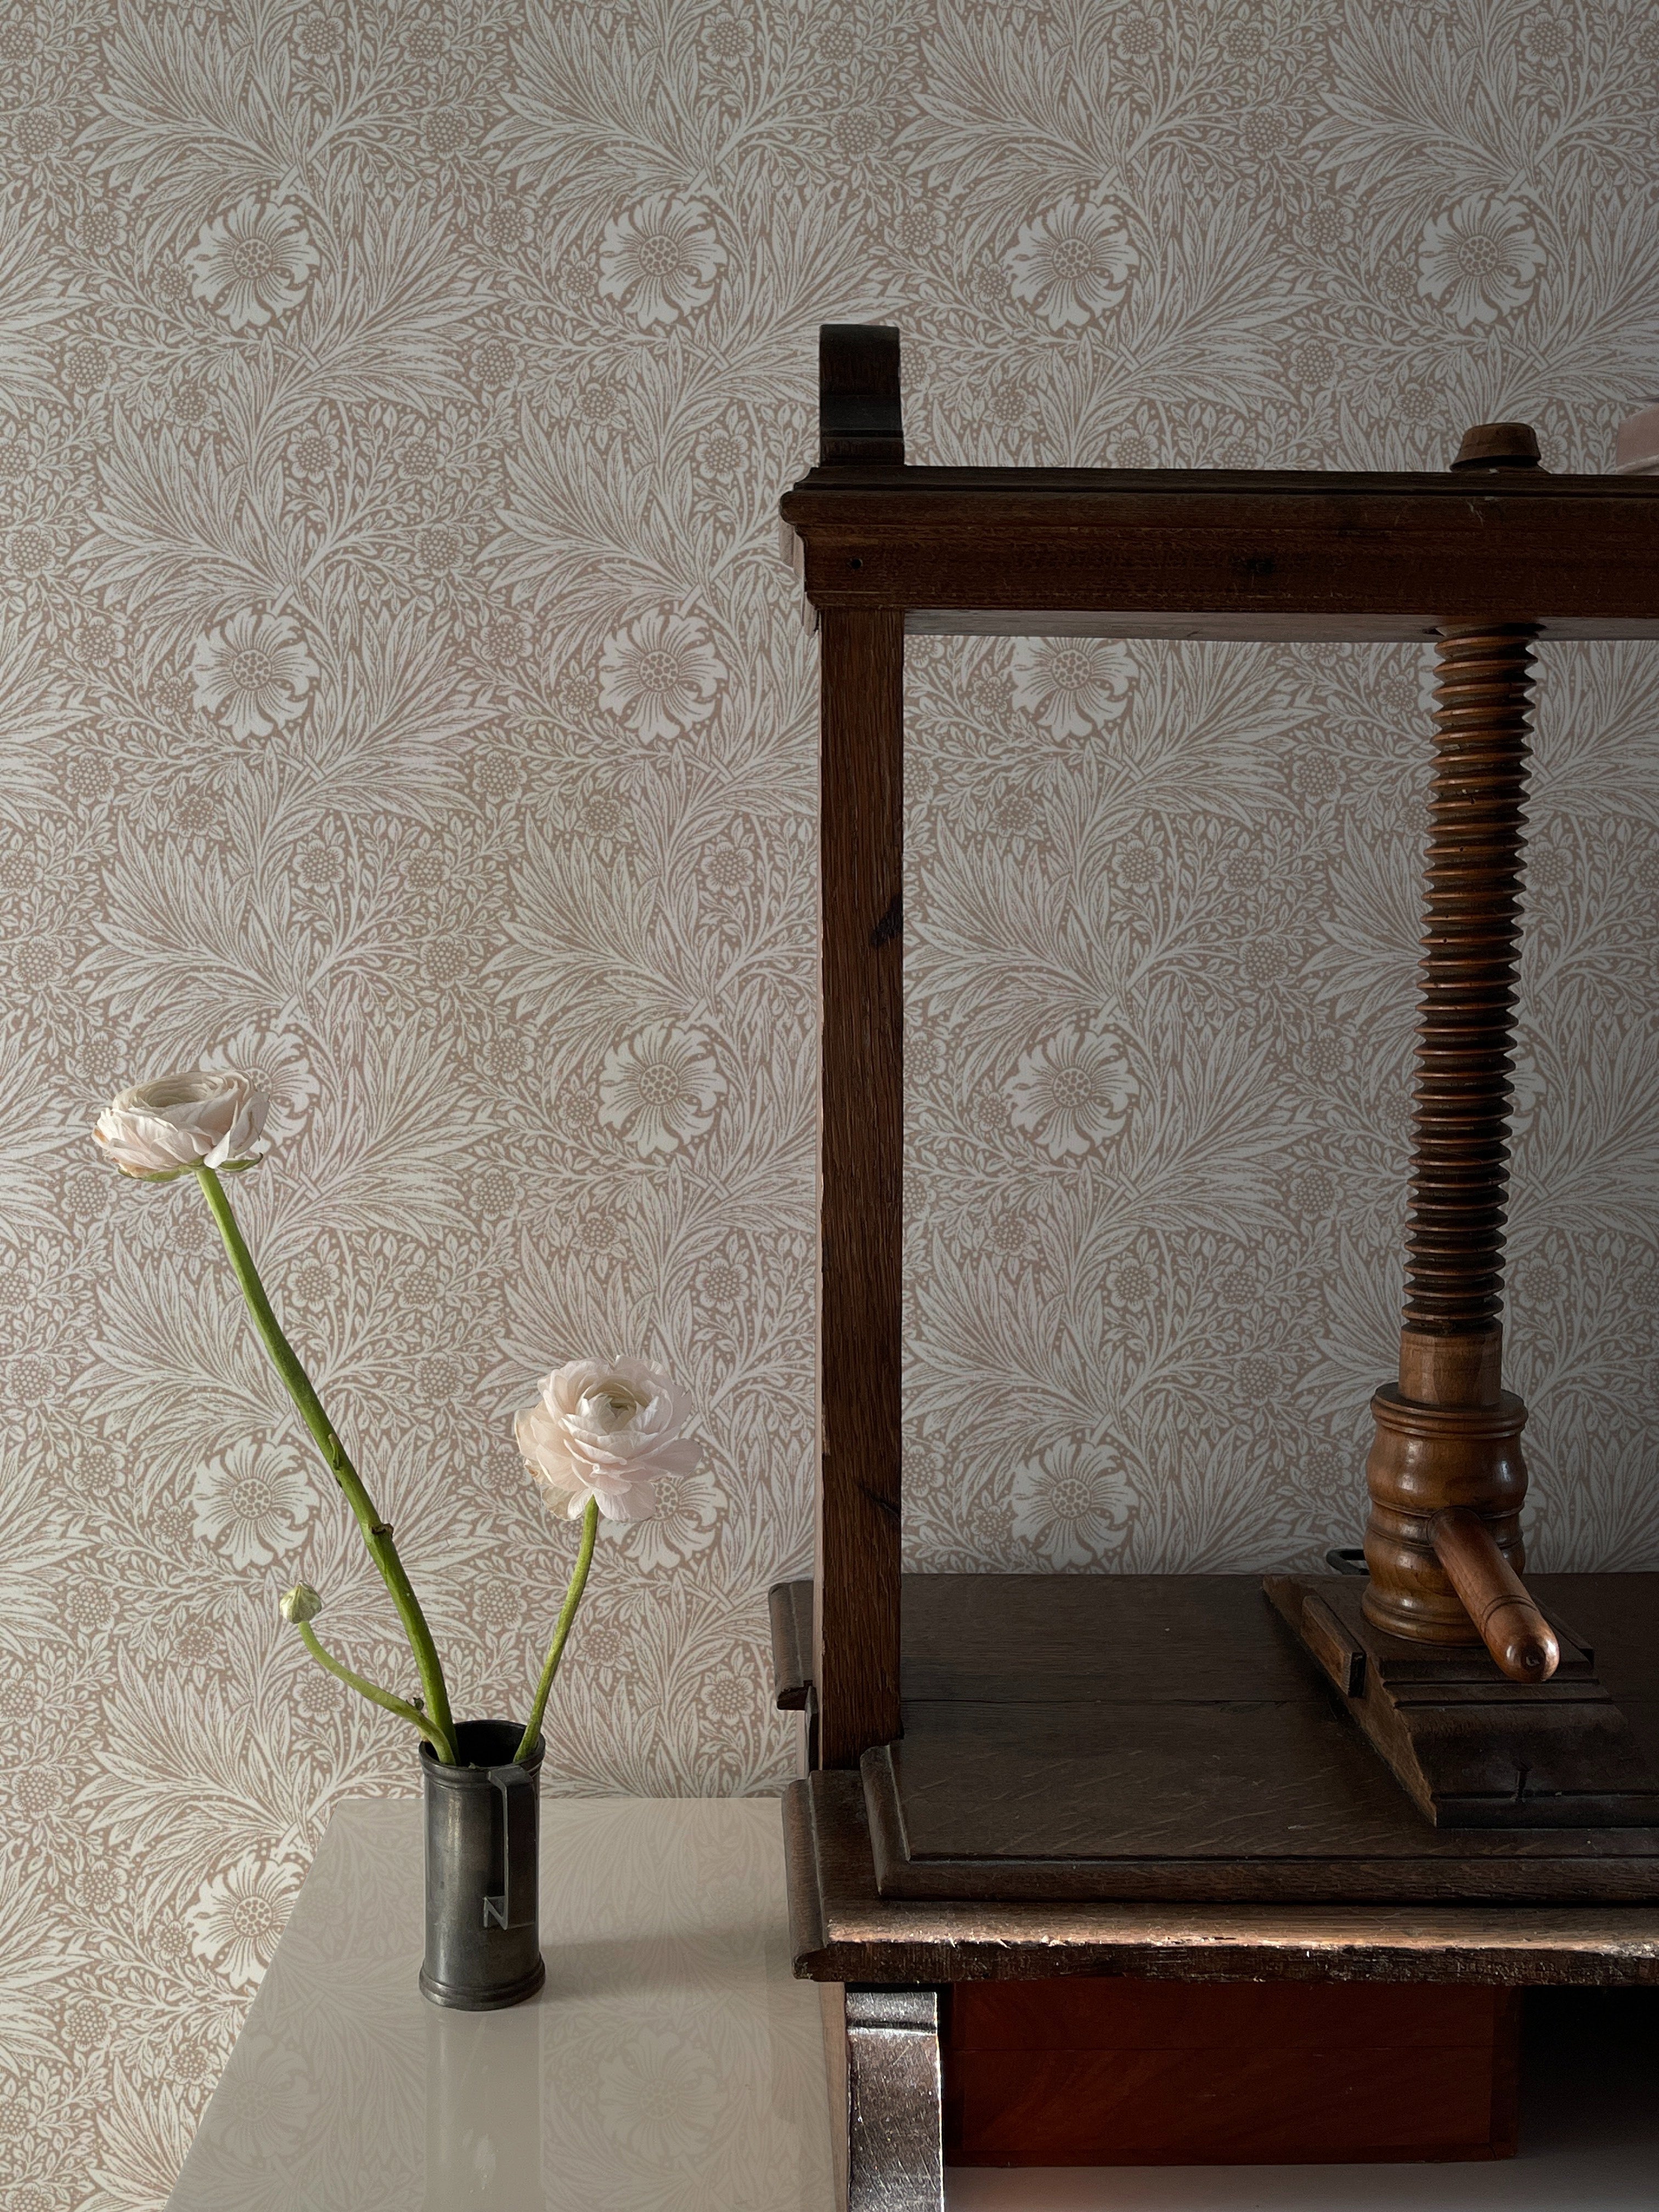 Sophisticated home office setup featuring Timeless Floral Wallpaper with beige floral motifs, enhancing the wooden desk and classic lamp aesthetics.